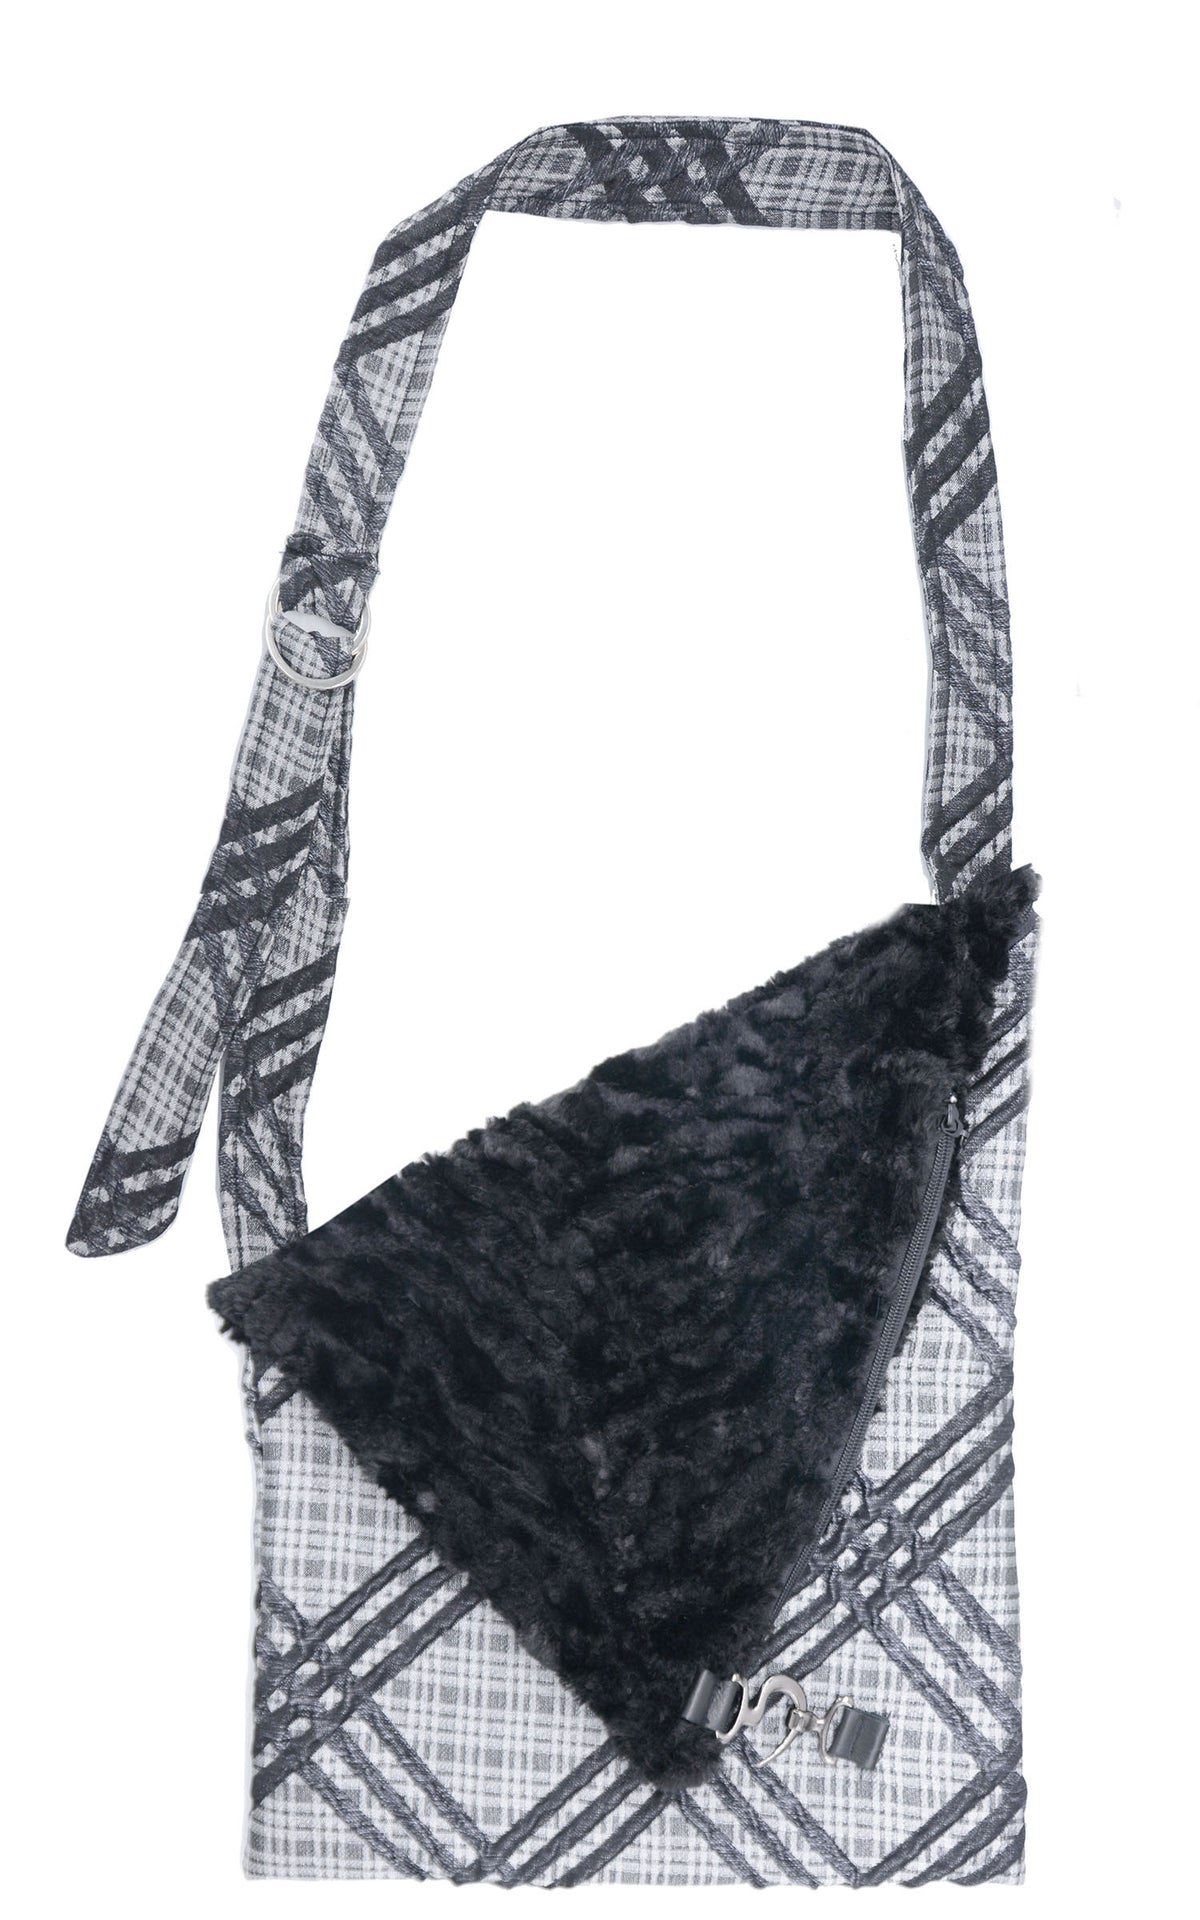 Naples Messenger Bag - Silver Plaid Upholstery with Cuddly Faux Fur in Black (Only One Left!)